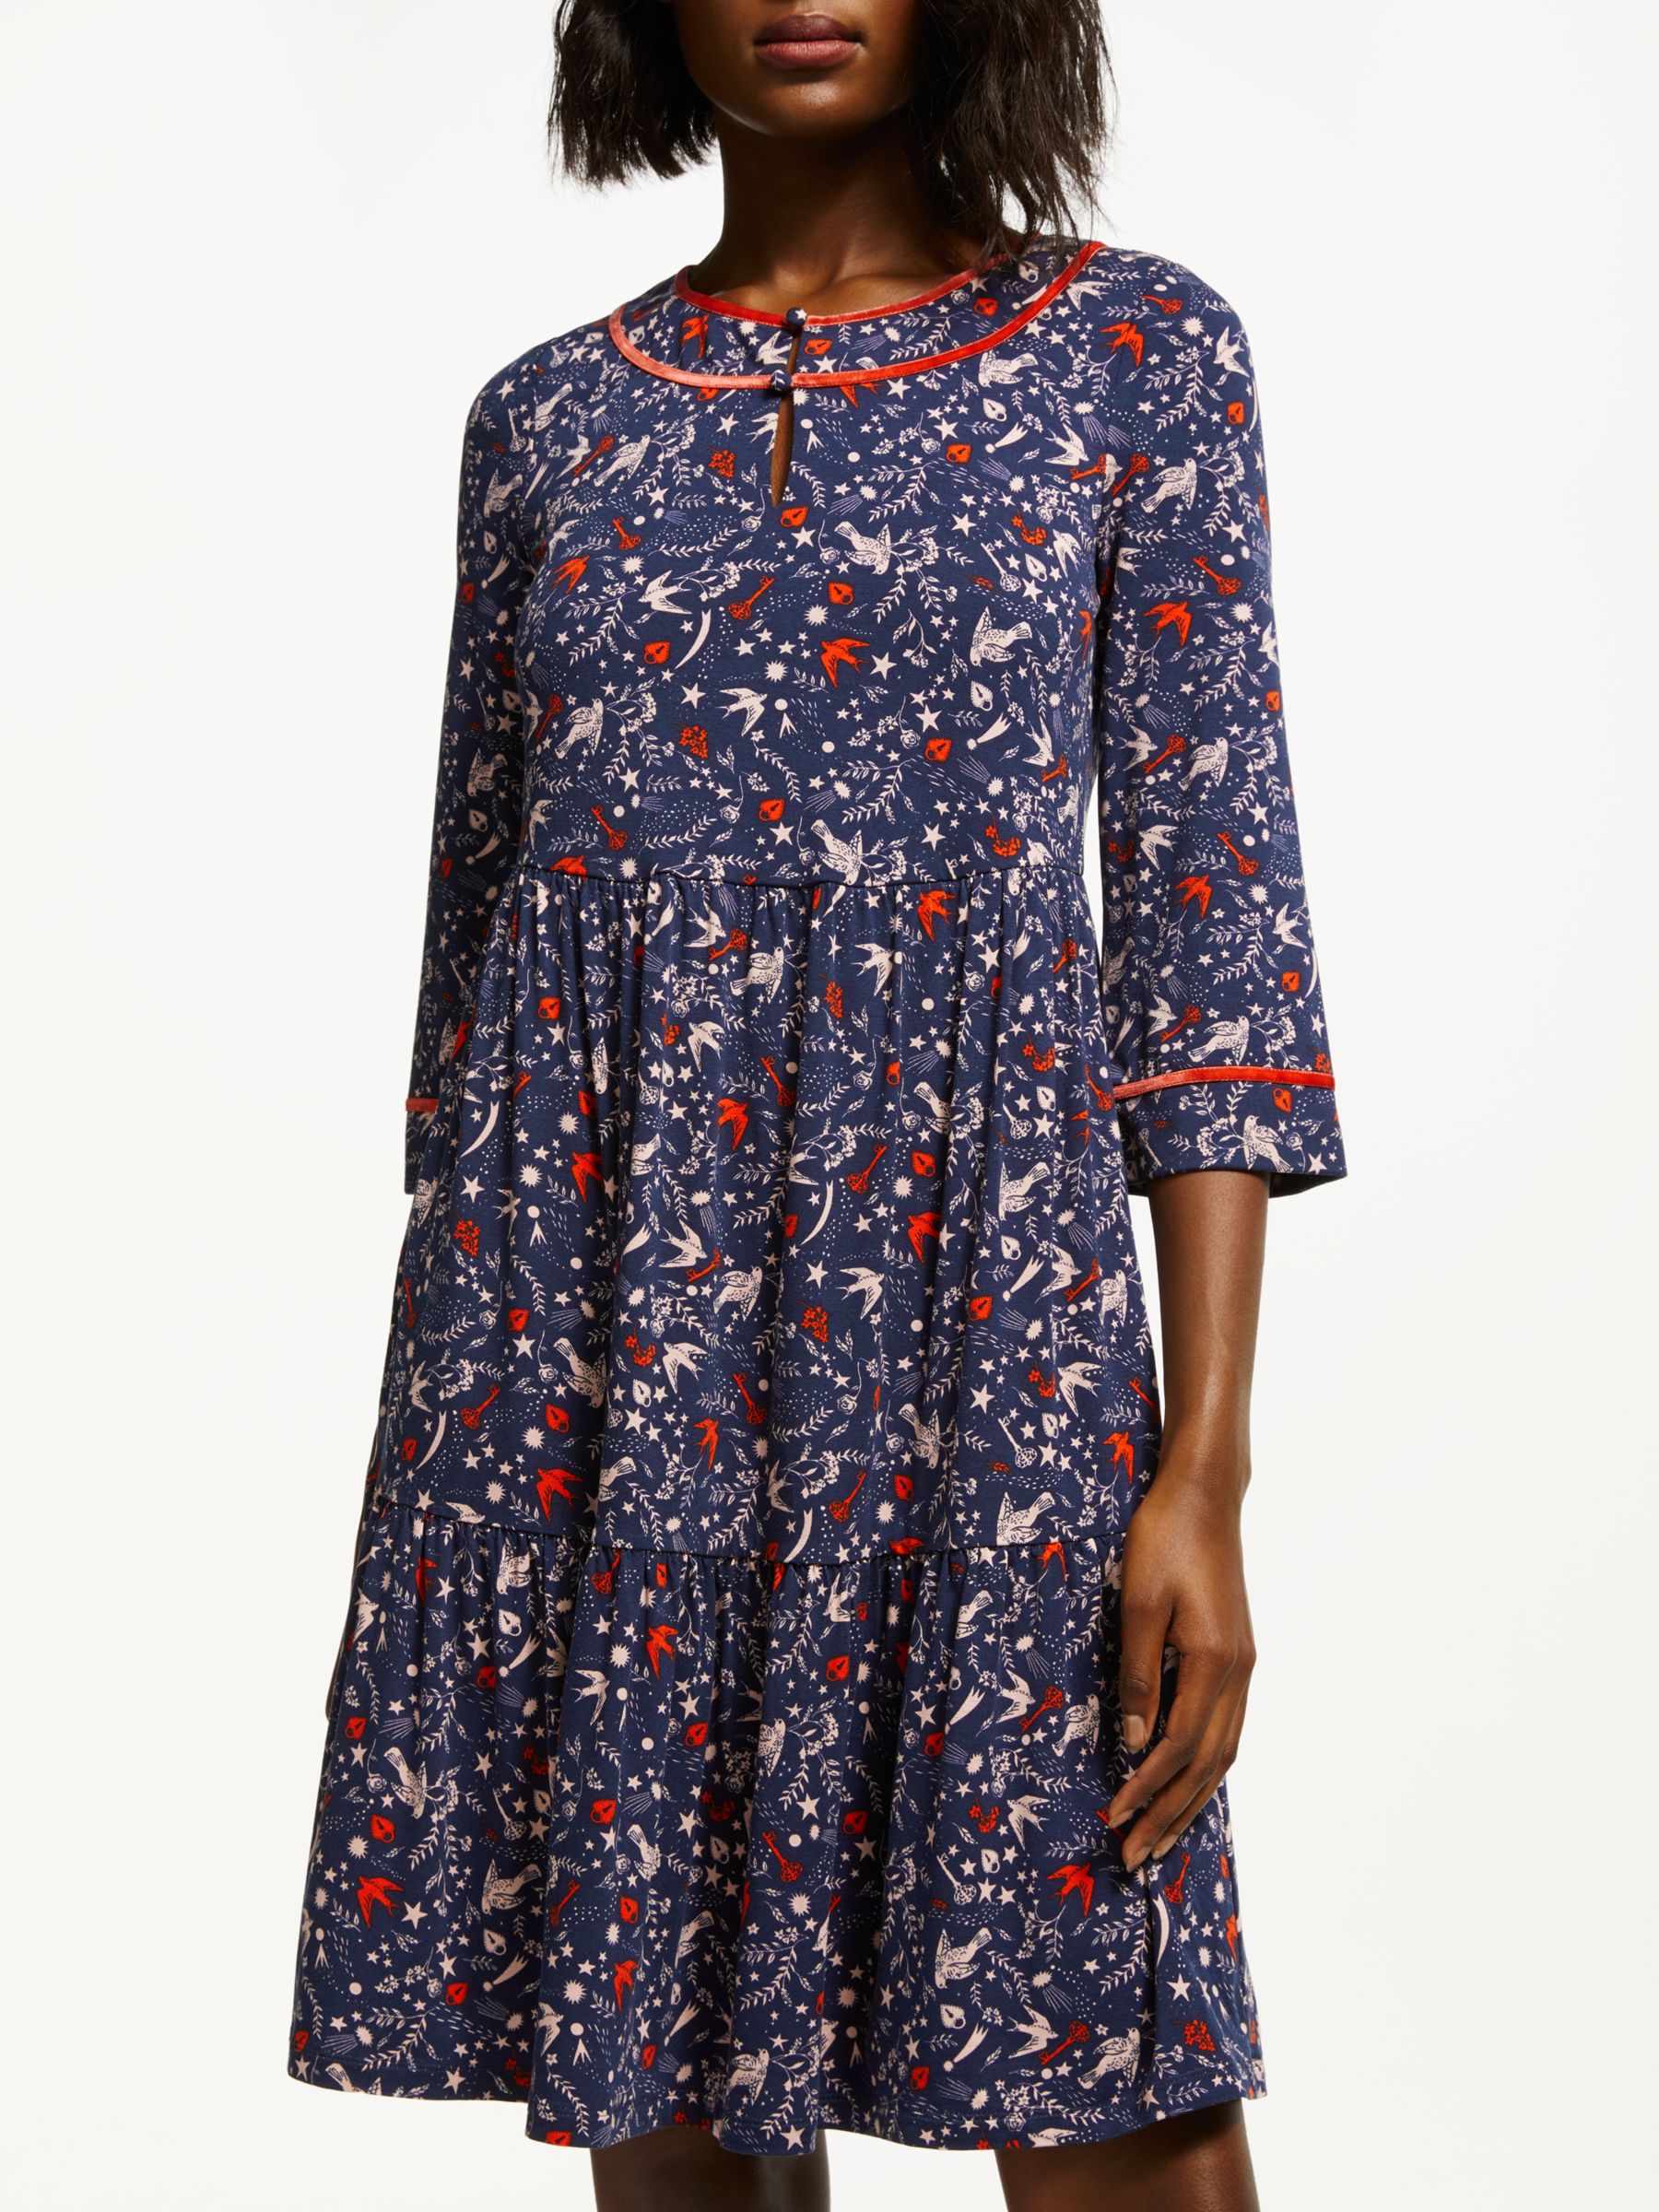 Boden Claire Jersey Dress, Navy at John 